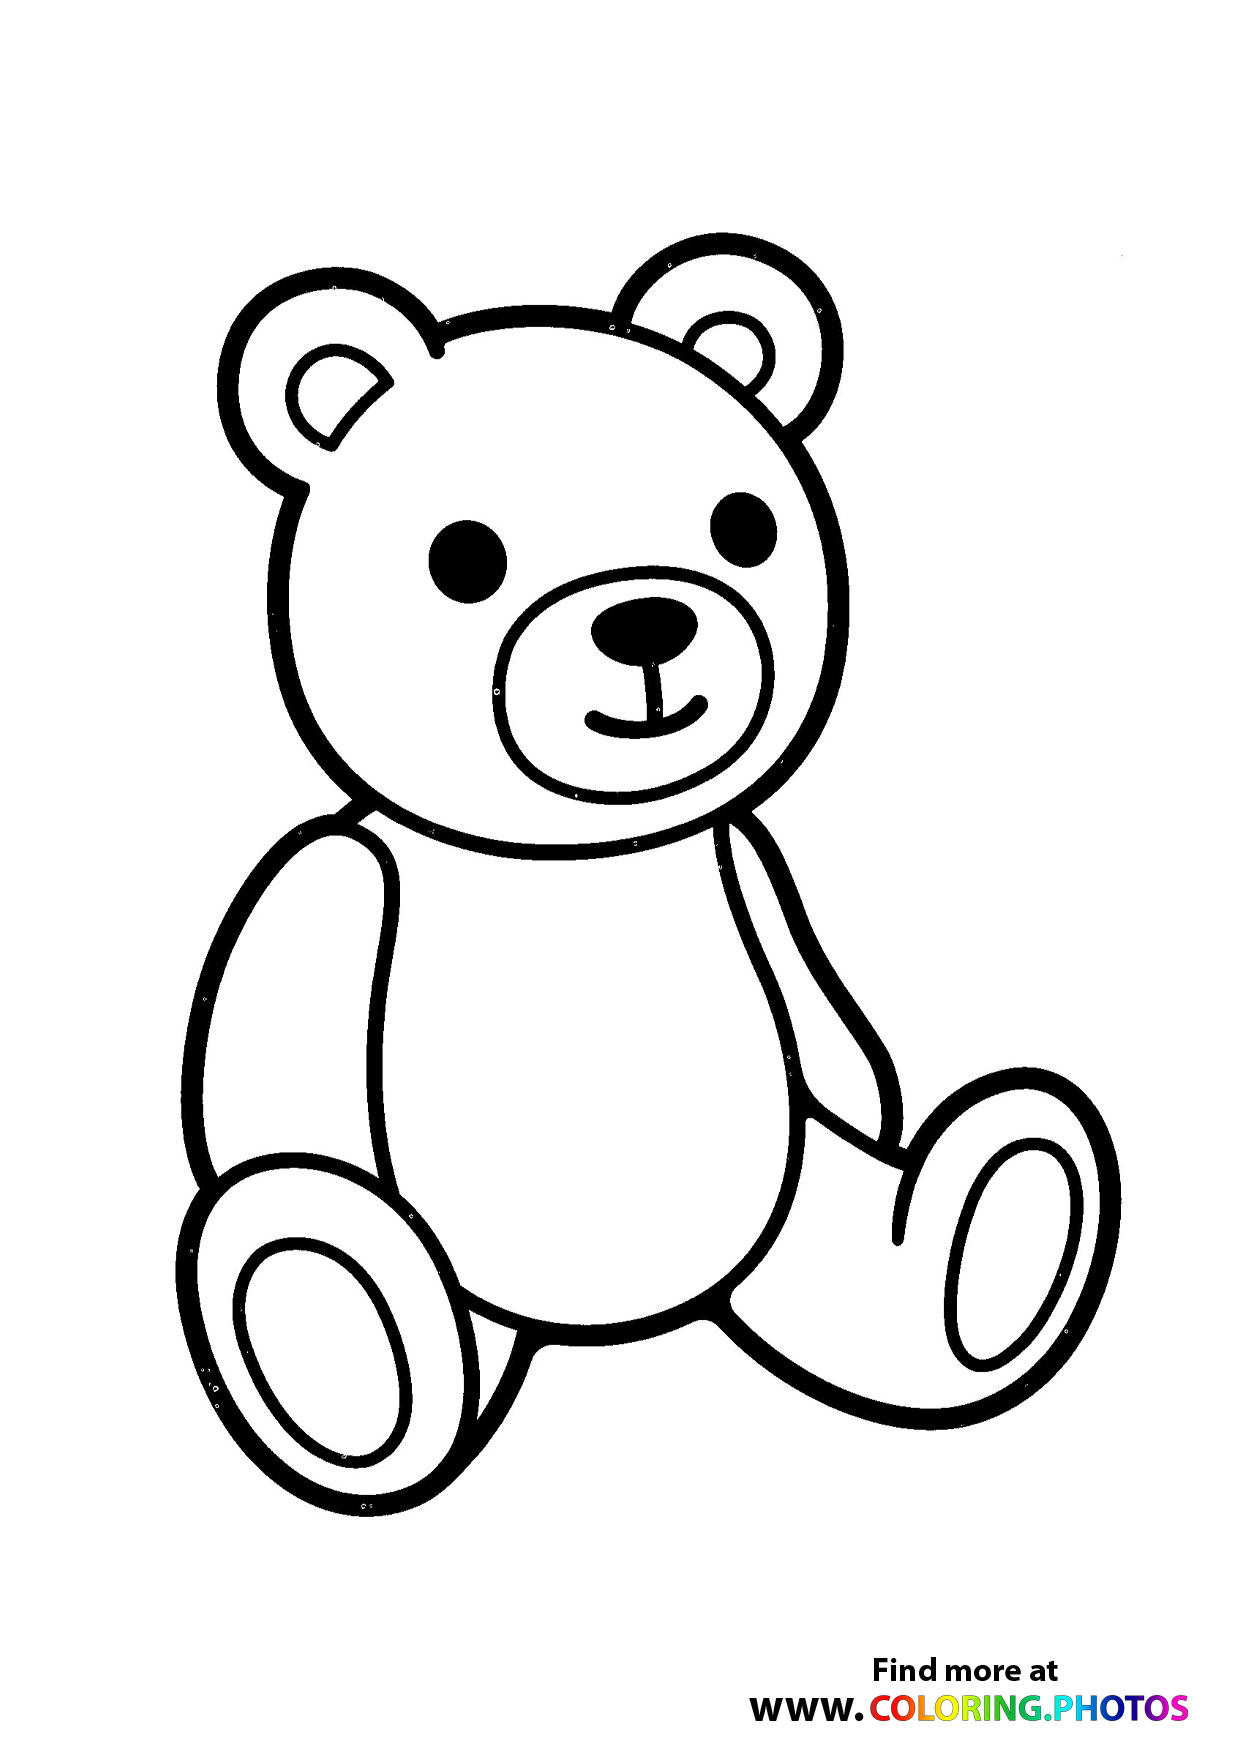 Teddy Bear sitting - Coloring Pages for kids